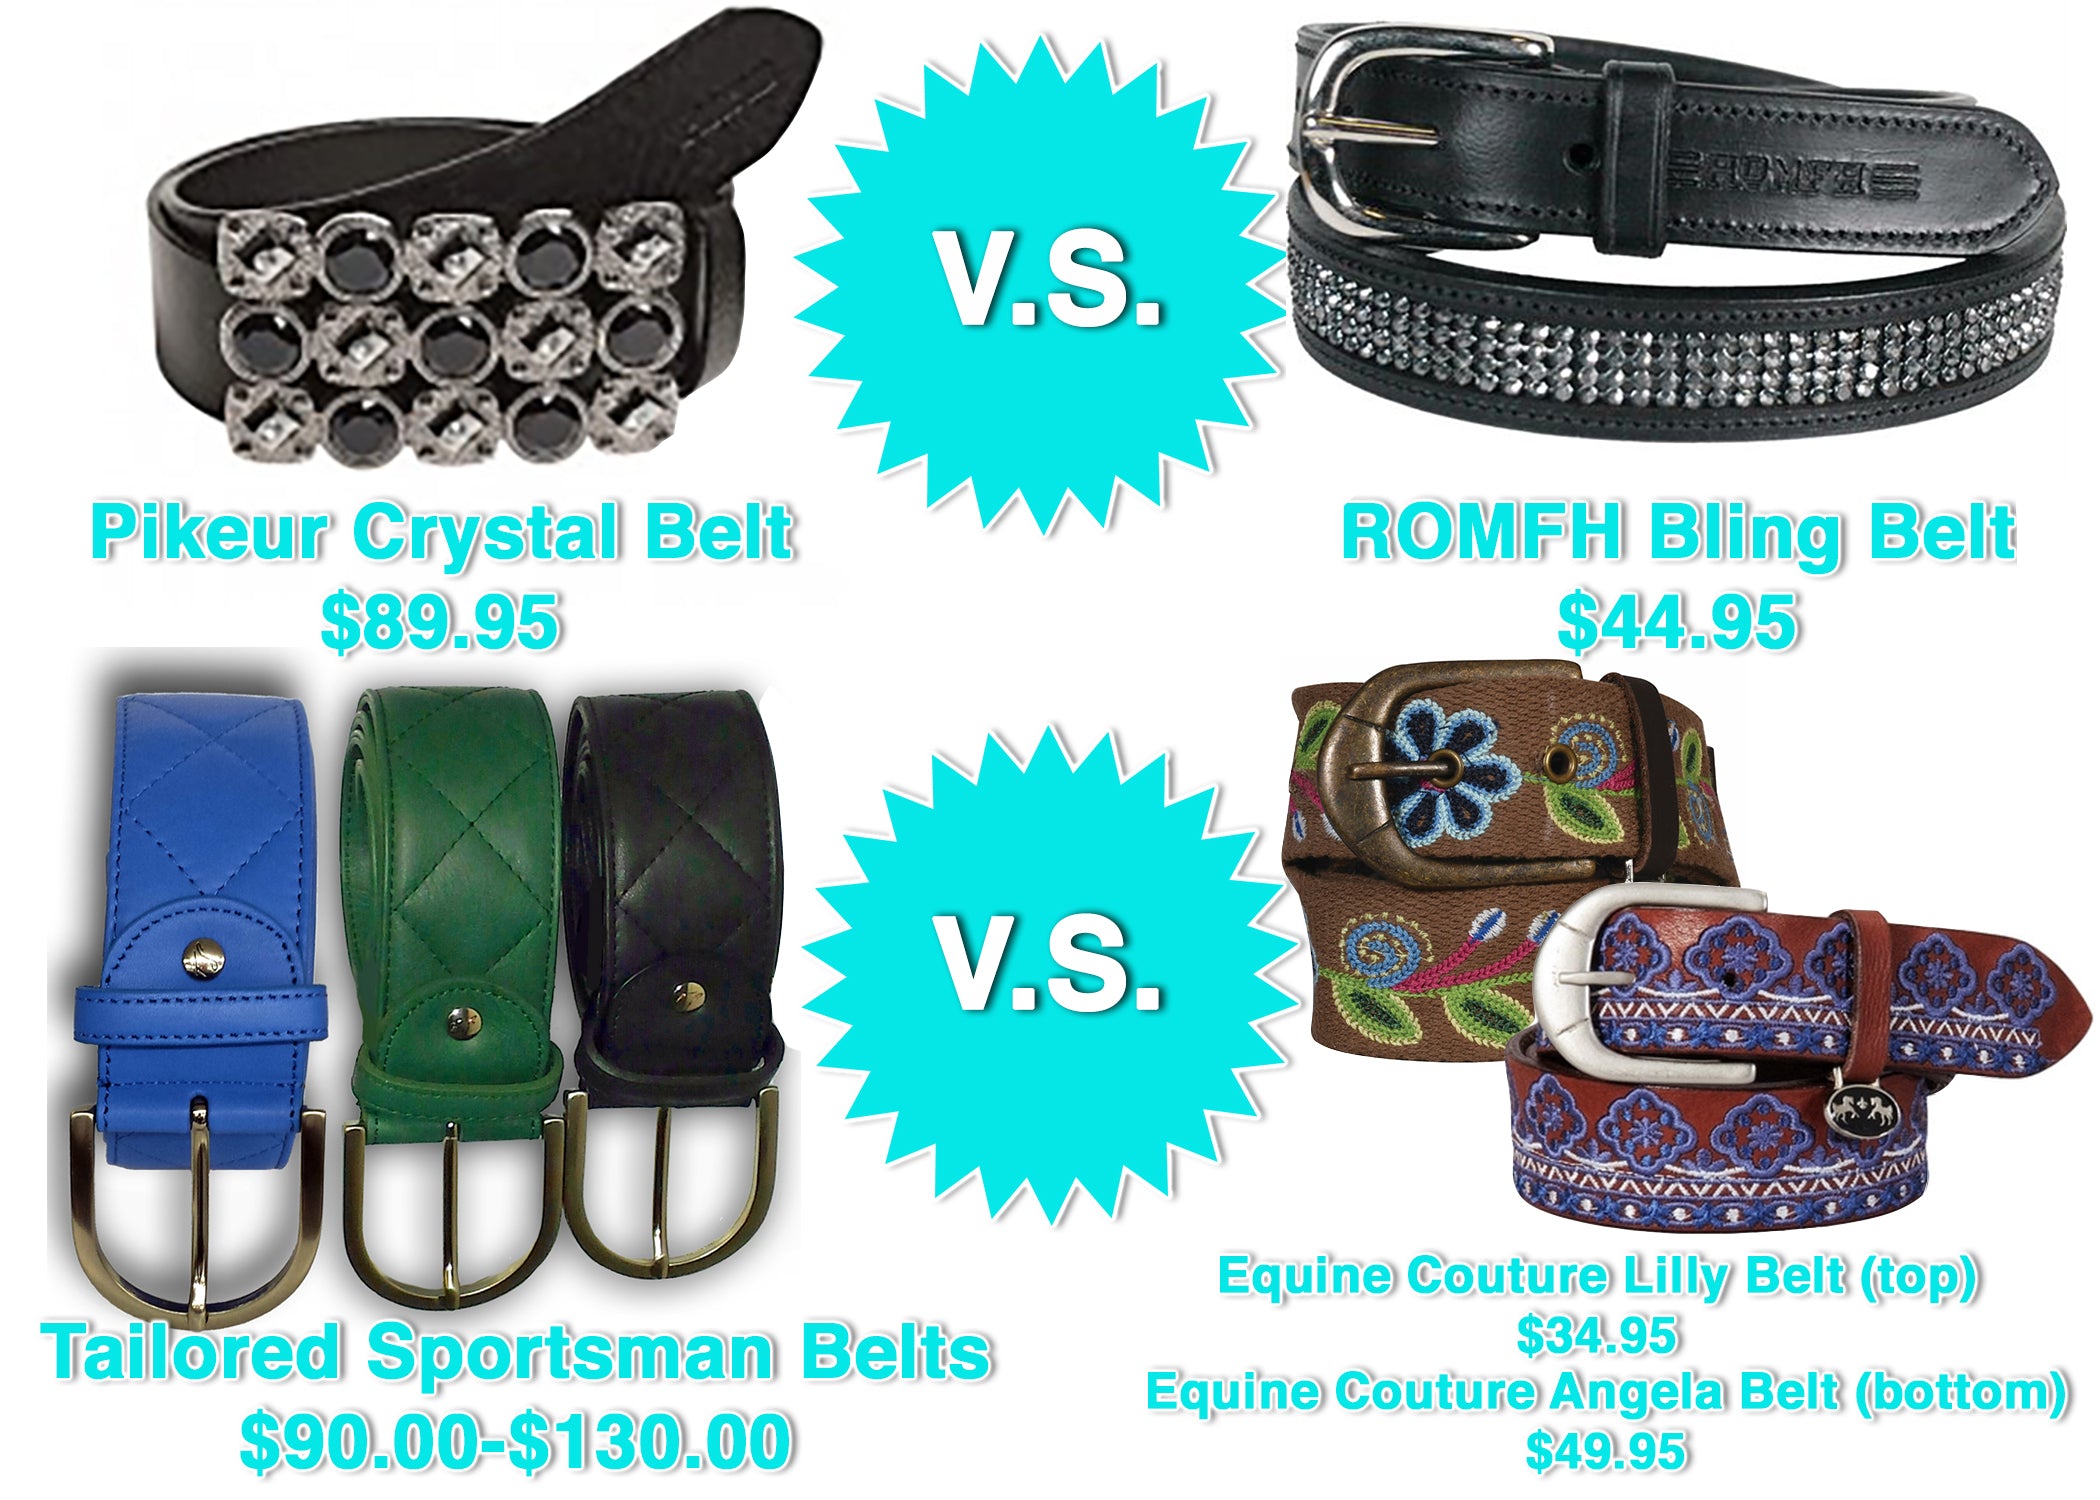 Pikeur and Tailored Sporstman belts